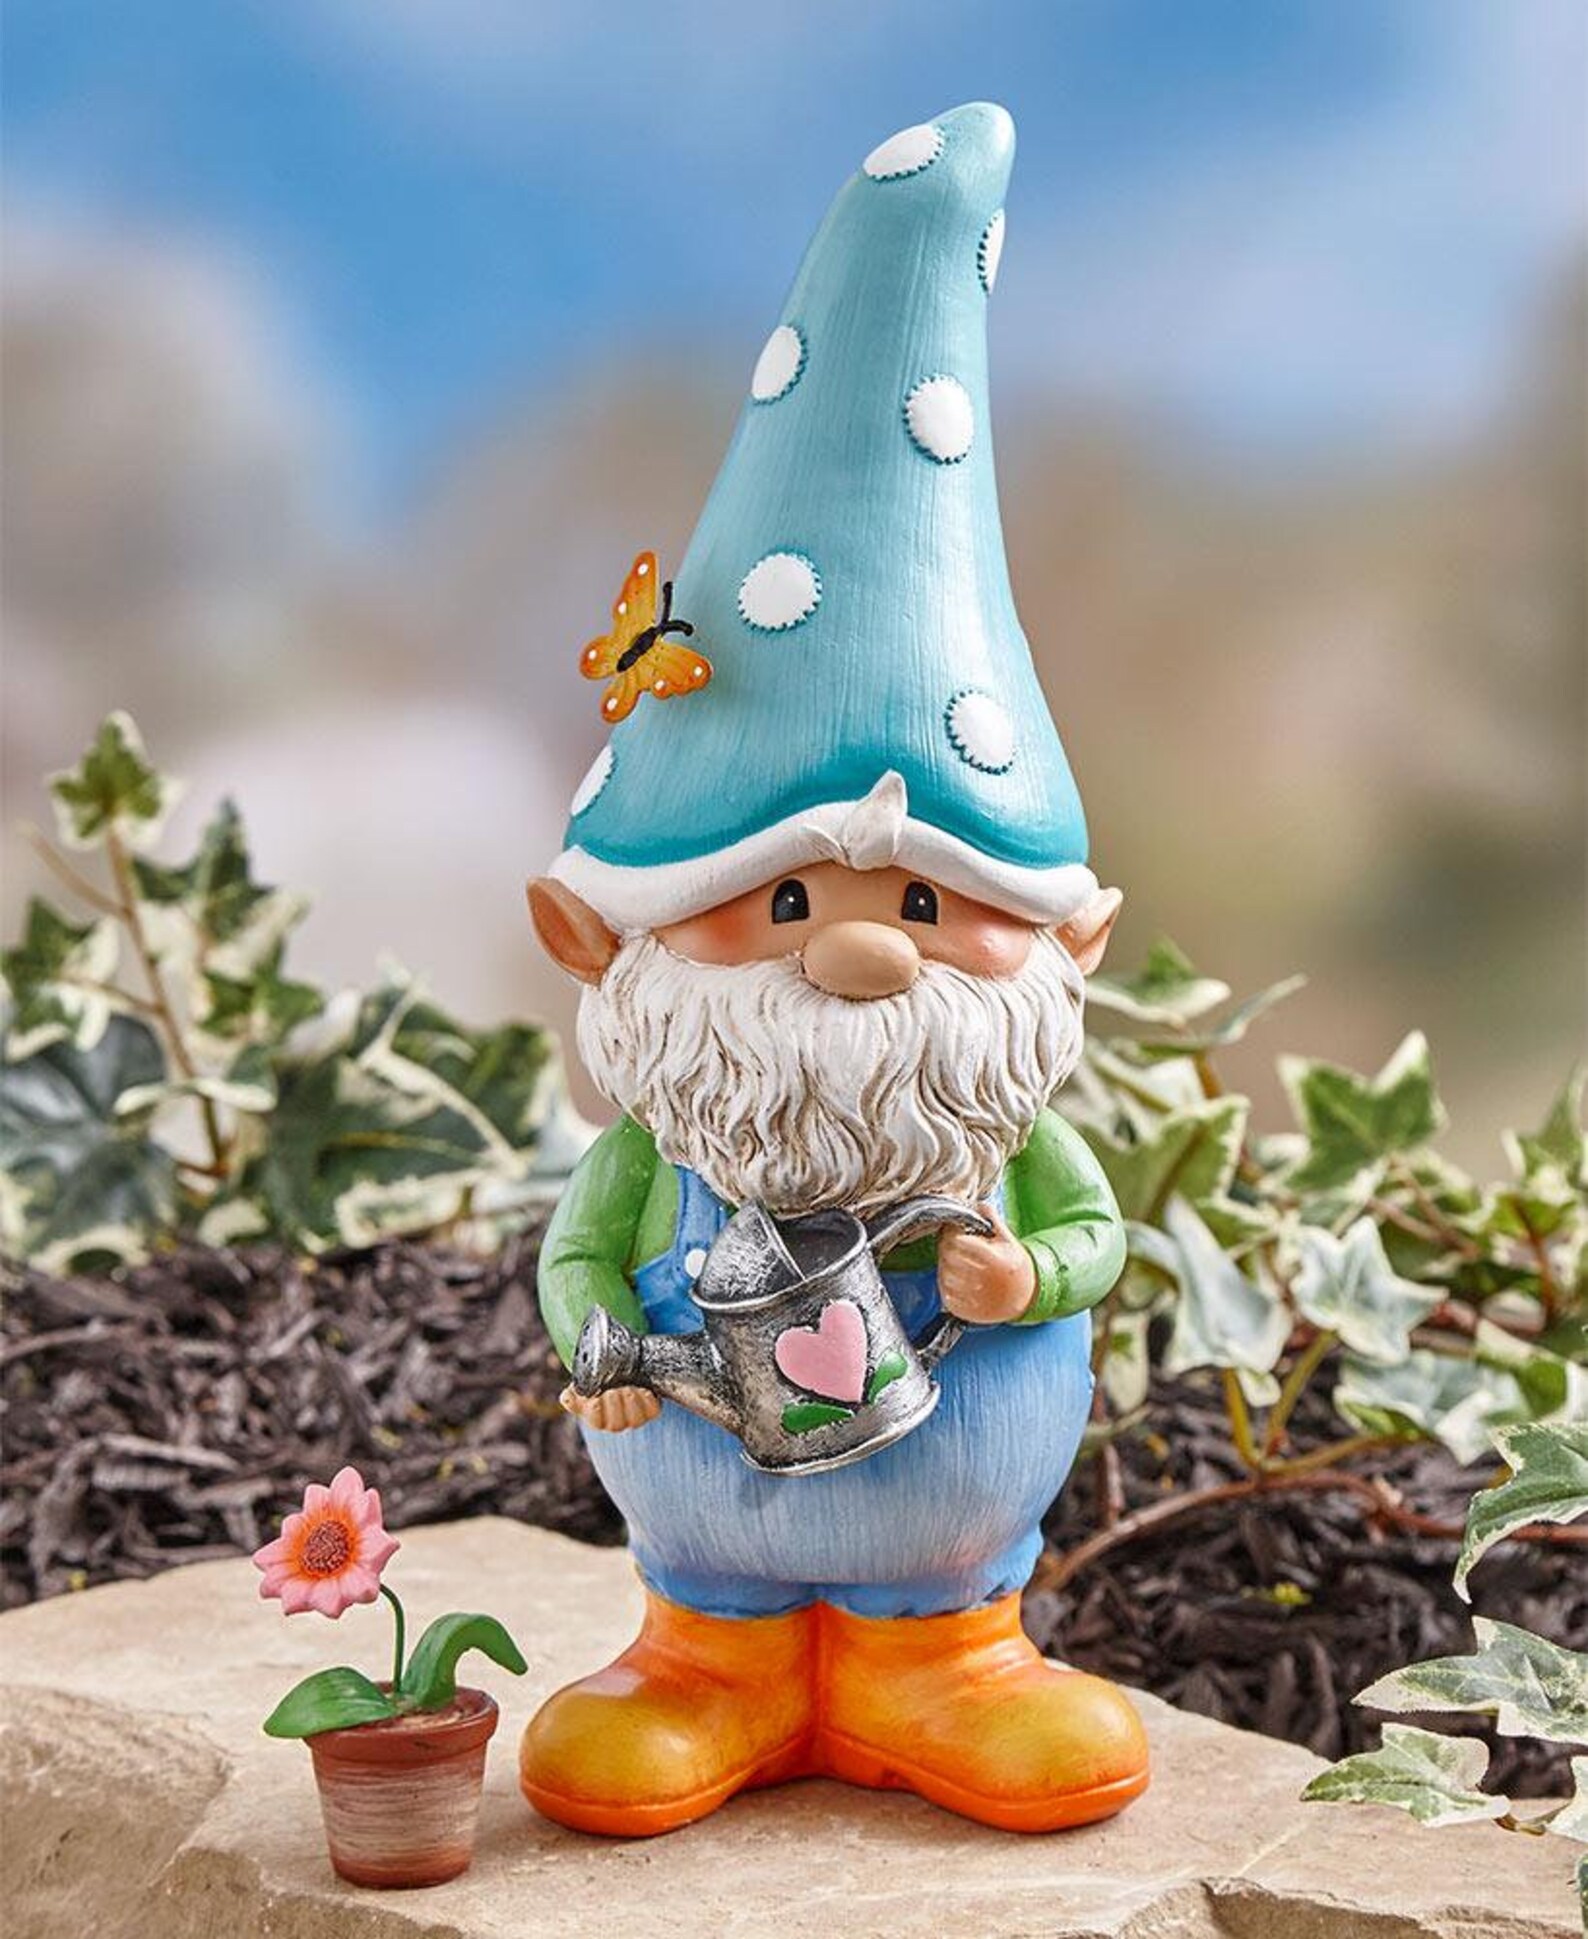 Whimsical Garden Gnome Friend Statues Vintage Outdoor Space Etsy